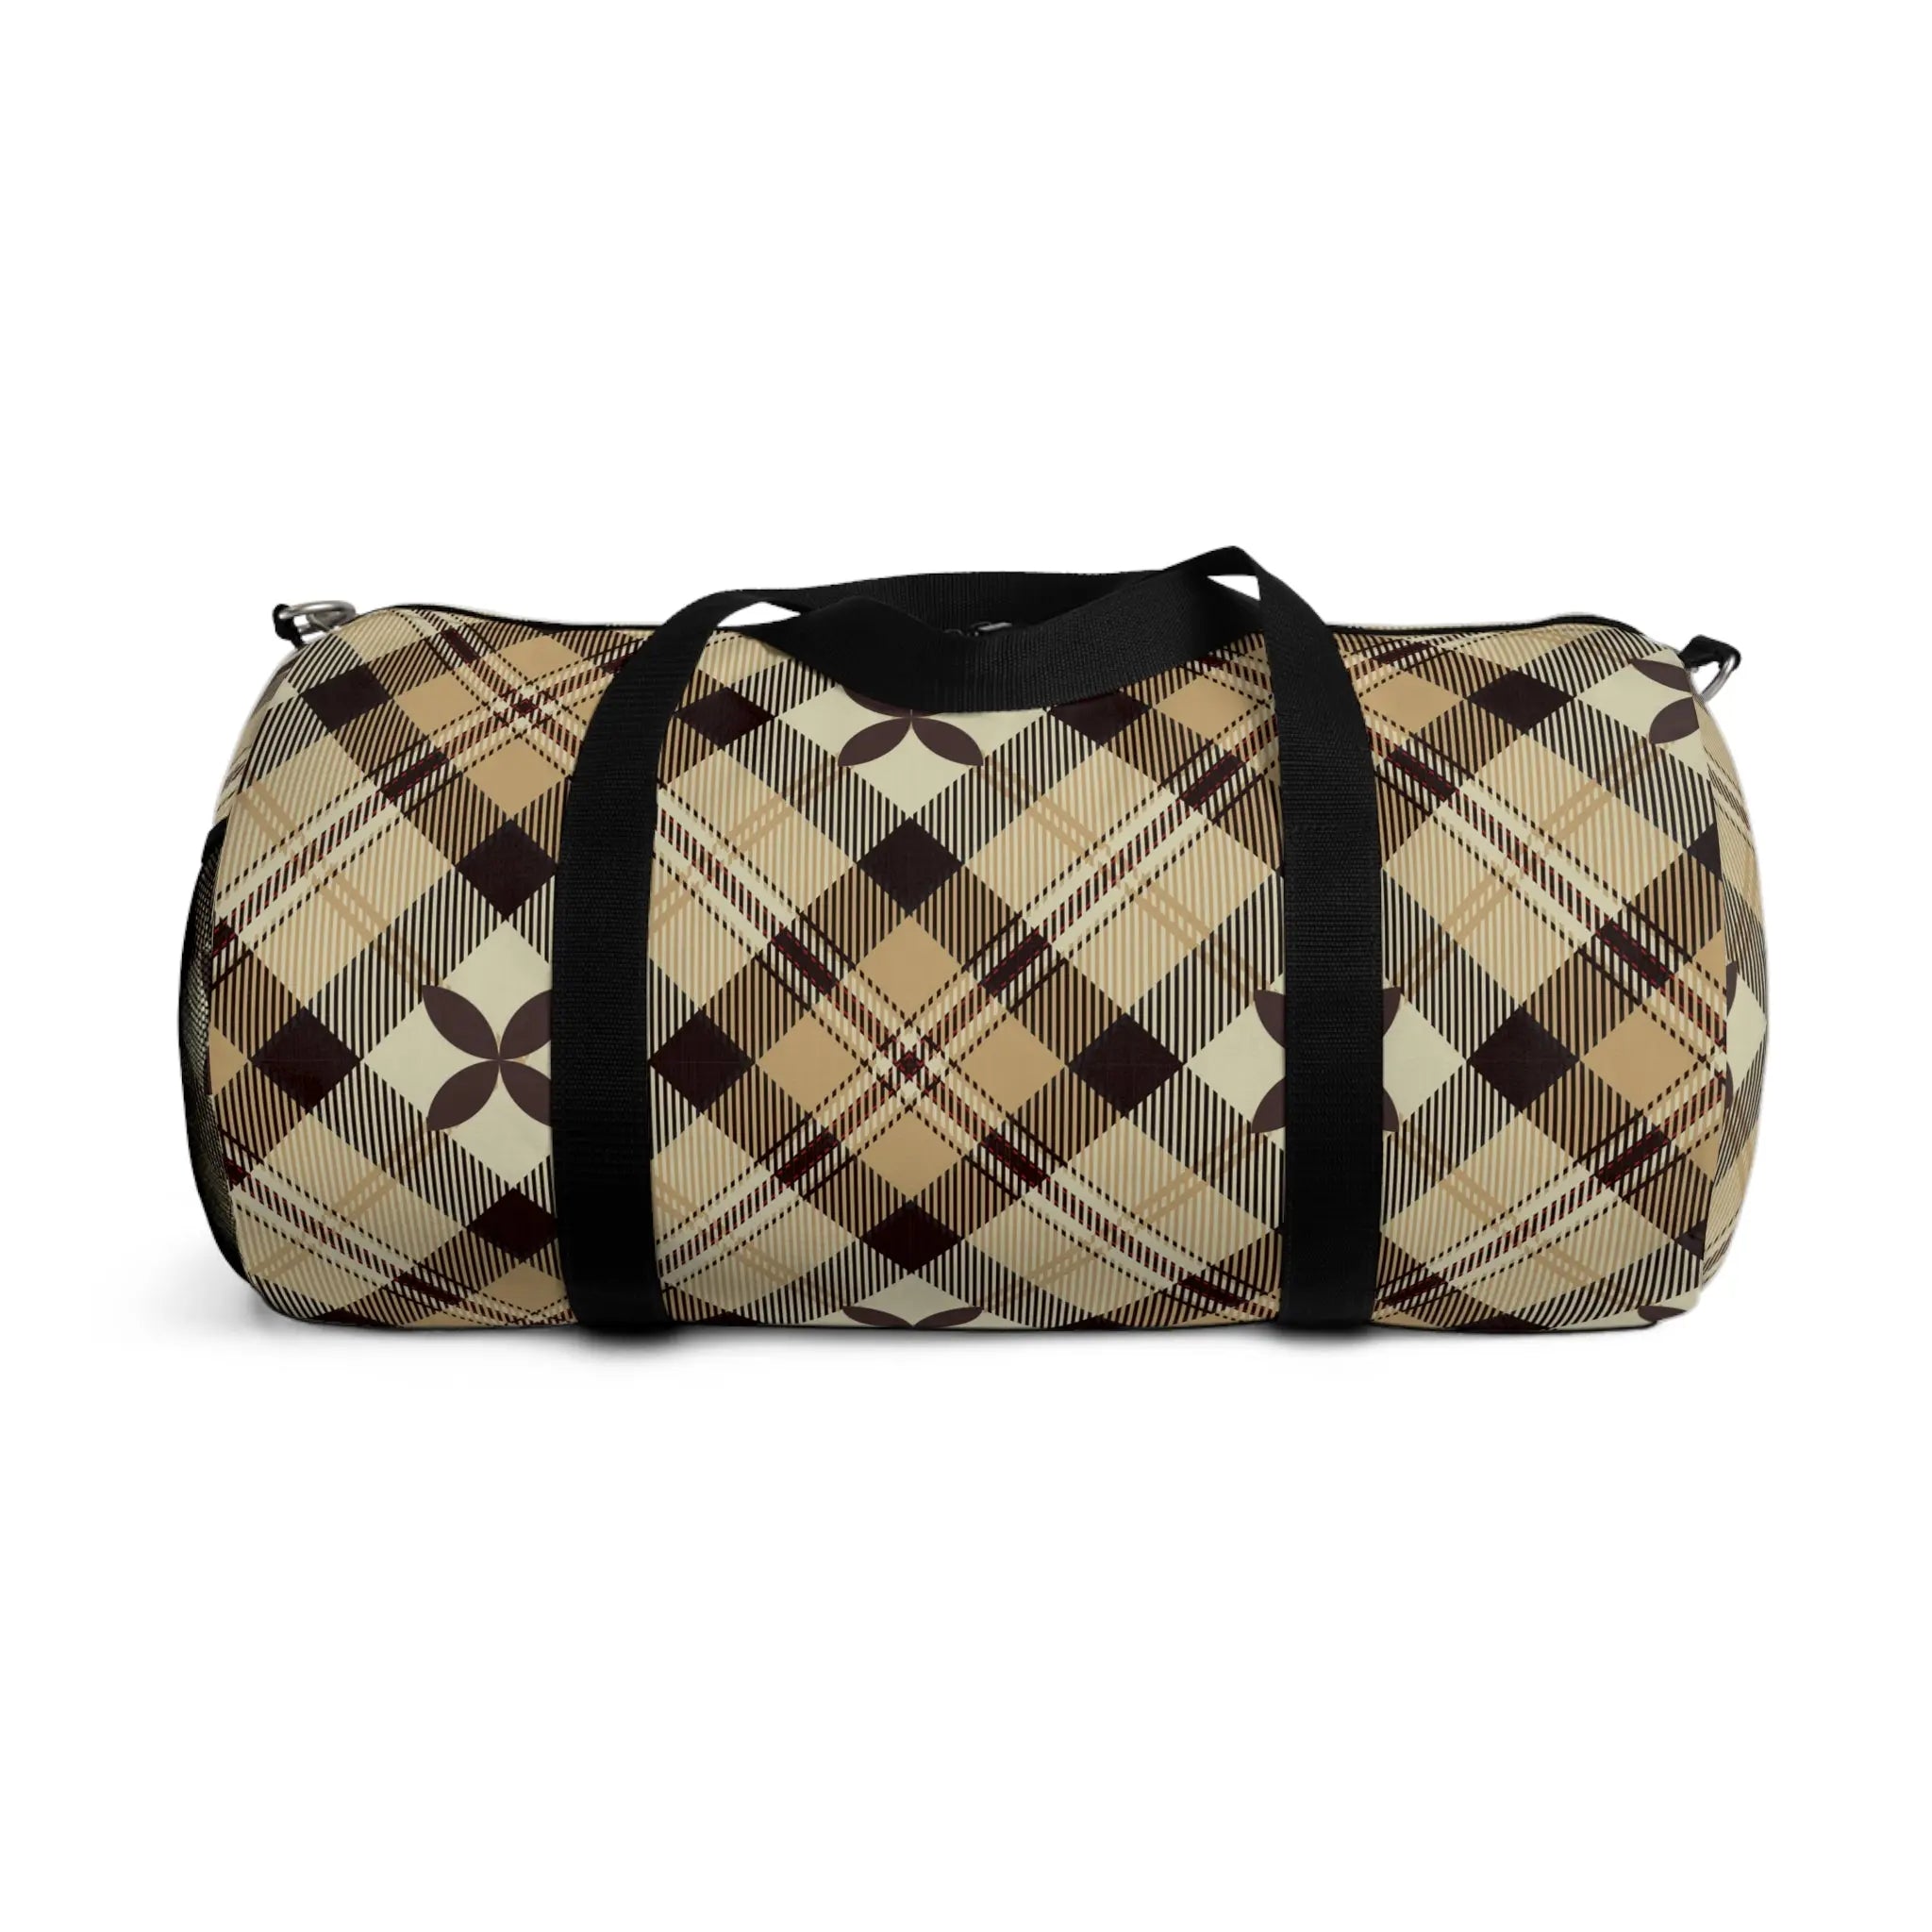  Abby Plaid in Gold and Flowers Duffel Bag, Travel and Overnight Bag Bags